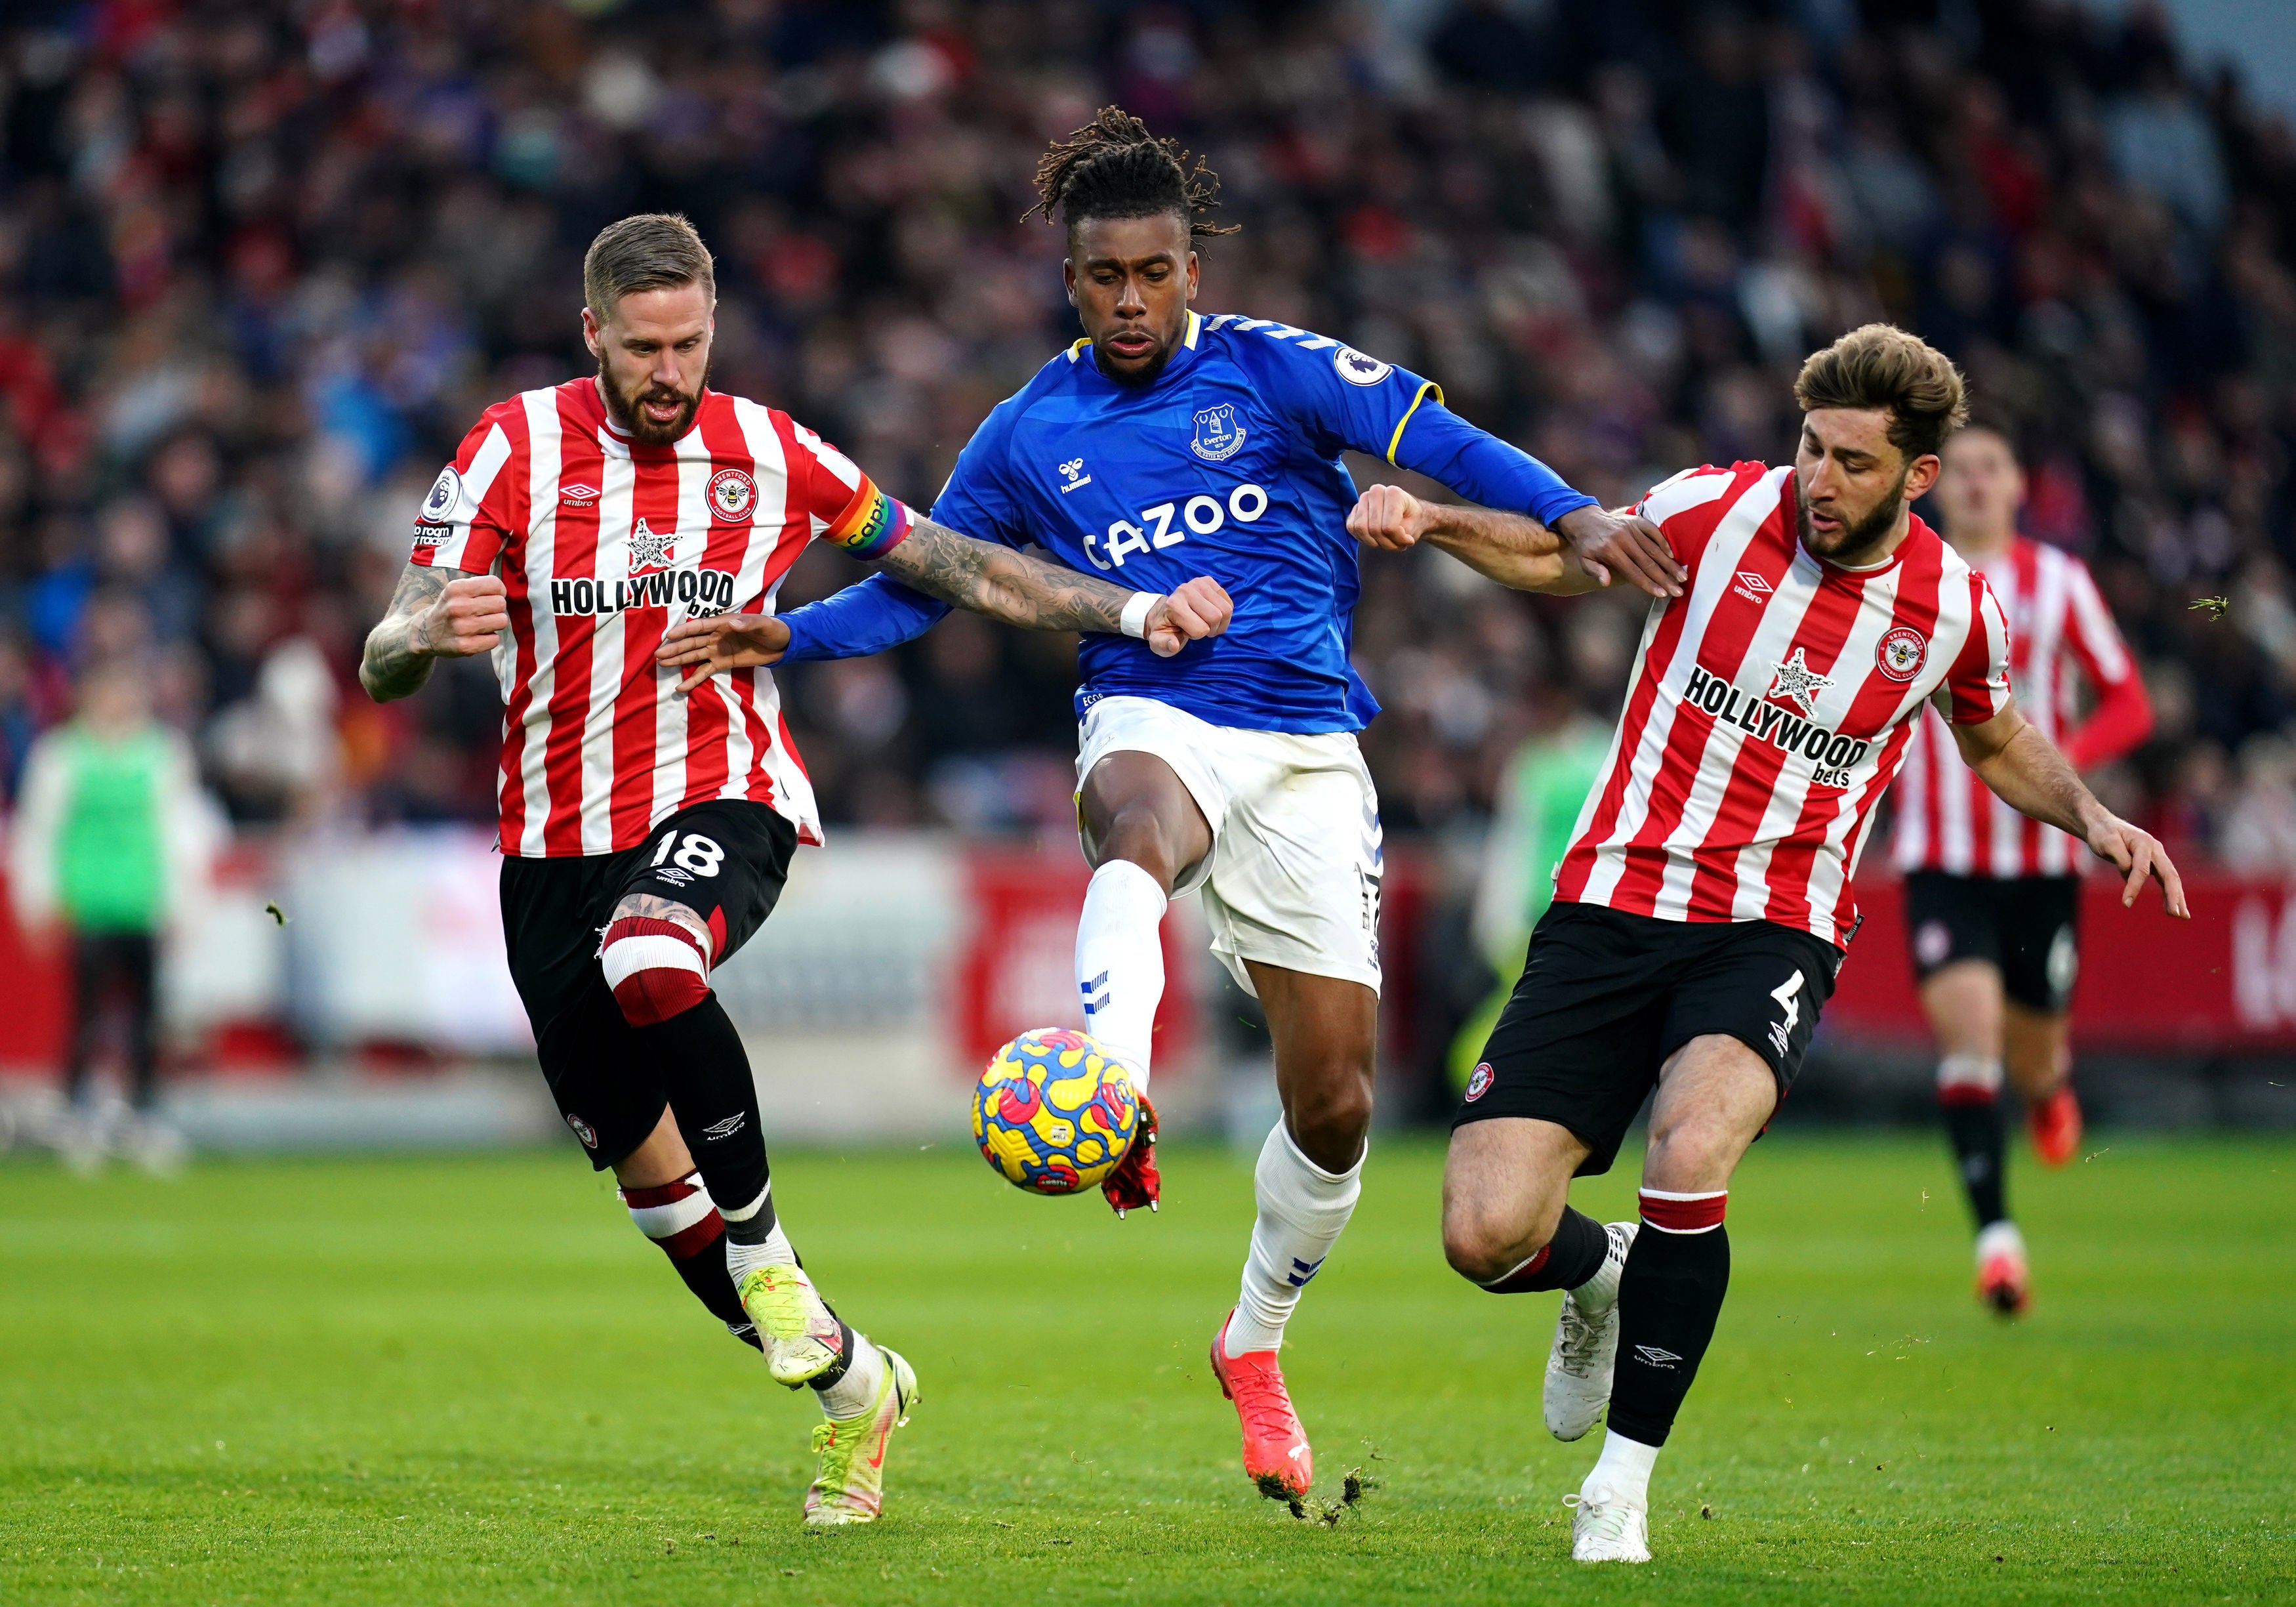 Everton's Alex Iwobi (centre) and Brentford's Pontus Jansson (left) and Charlie Goode battle for the ball